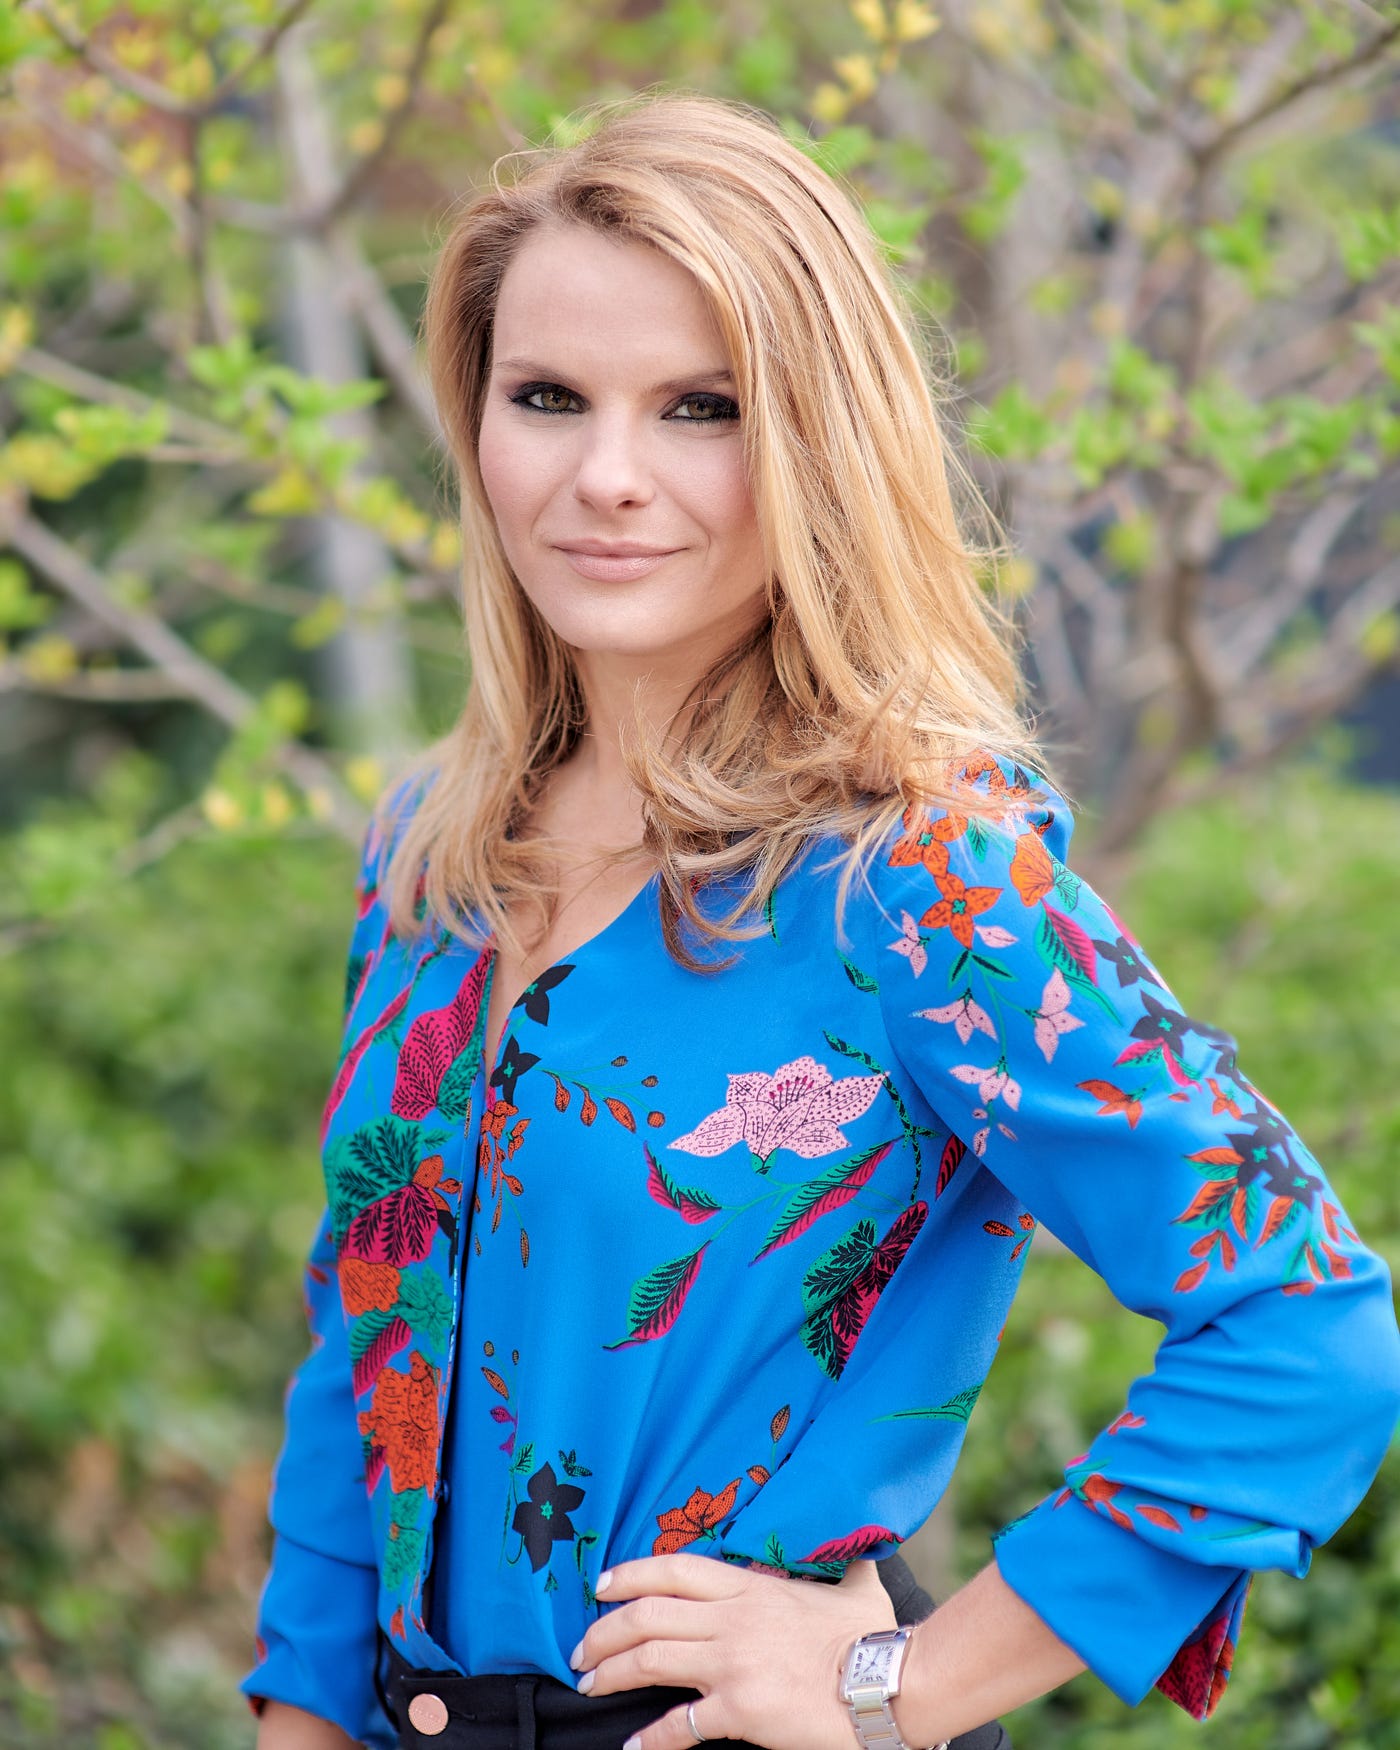 Inspirational Women Leaders Of Tech: Michele Romanow of Clearbanc On ...